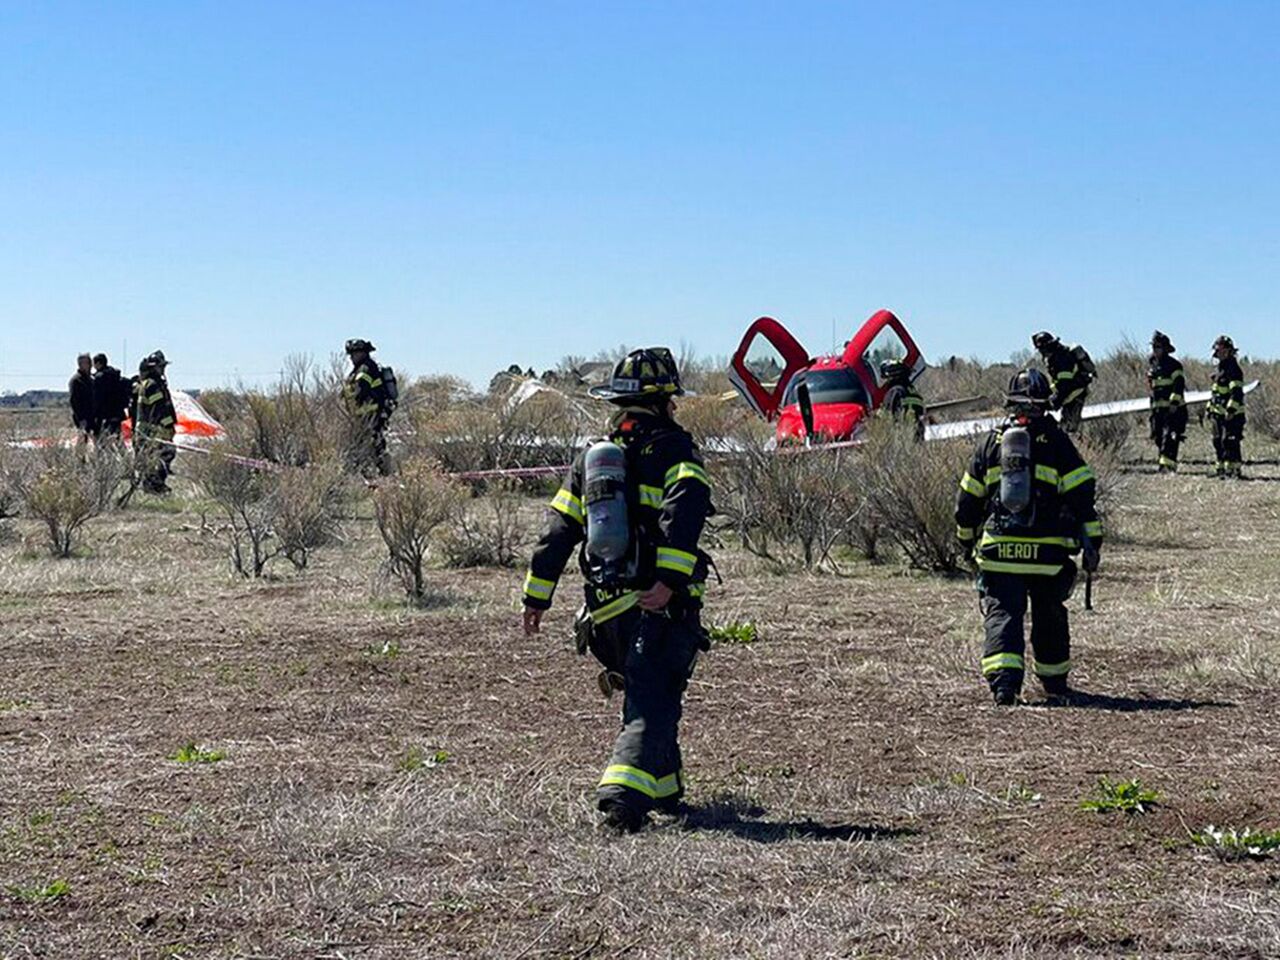 wo small planes collided midair over central Colorado on Wednesday morning. Remarkably, the three people involved in the incident were unharmed. AP